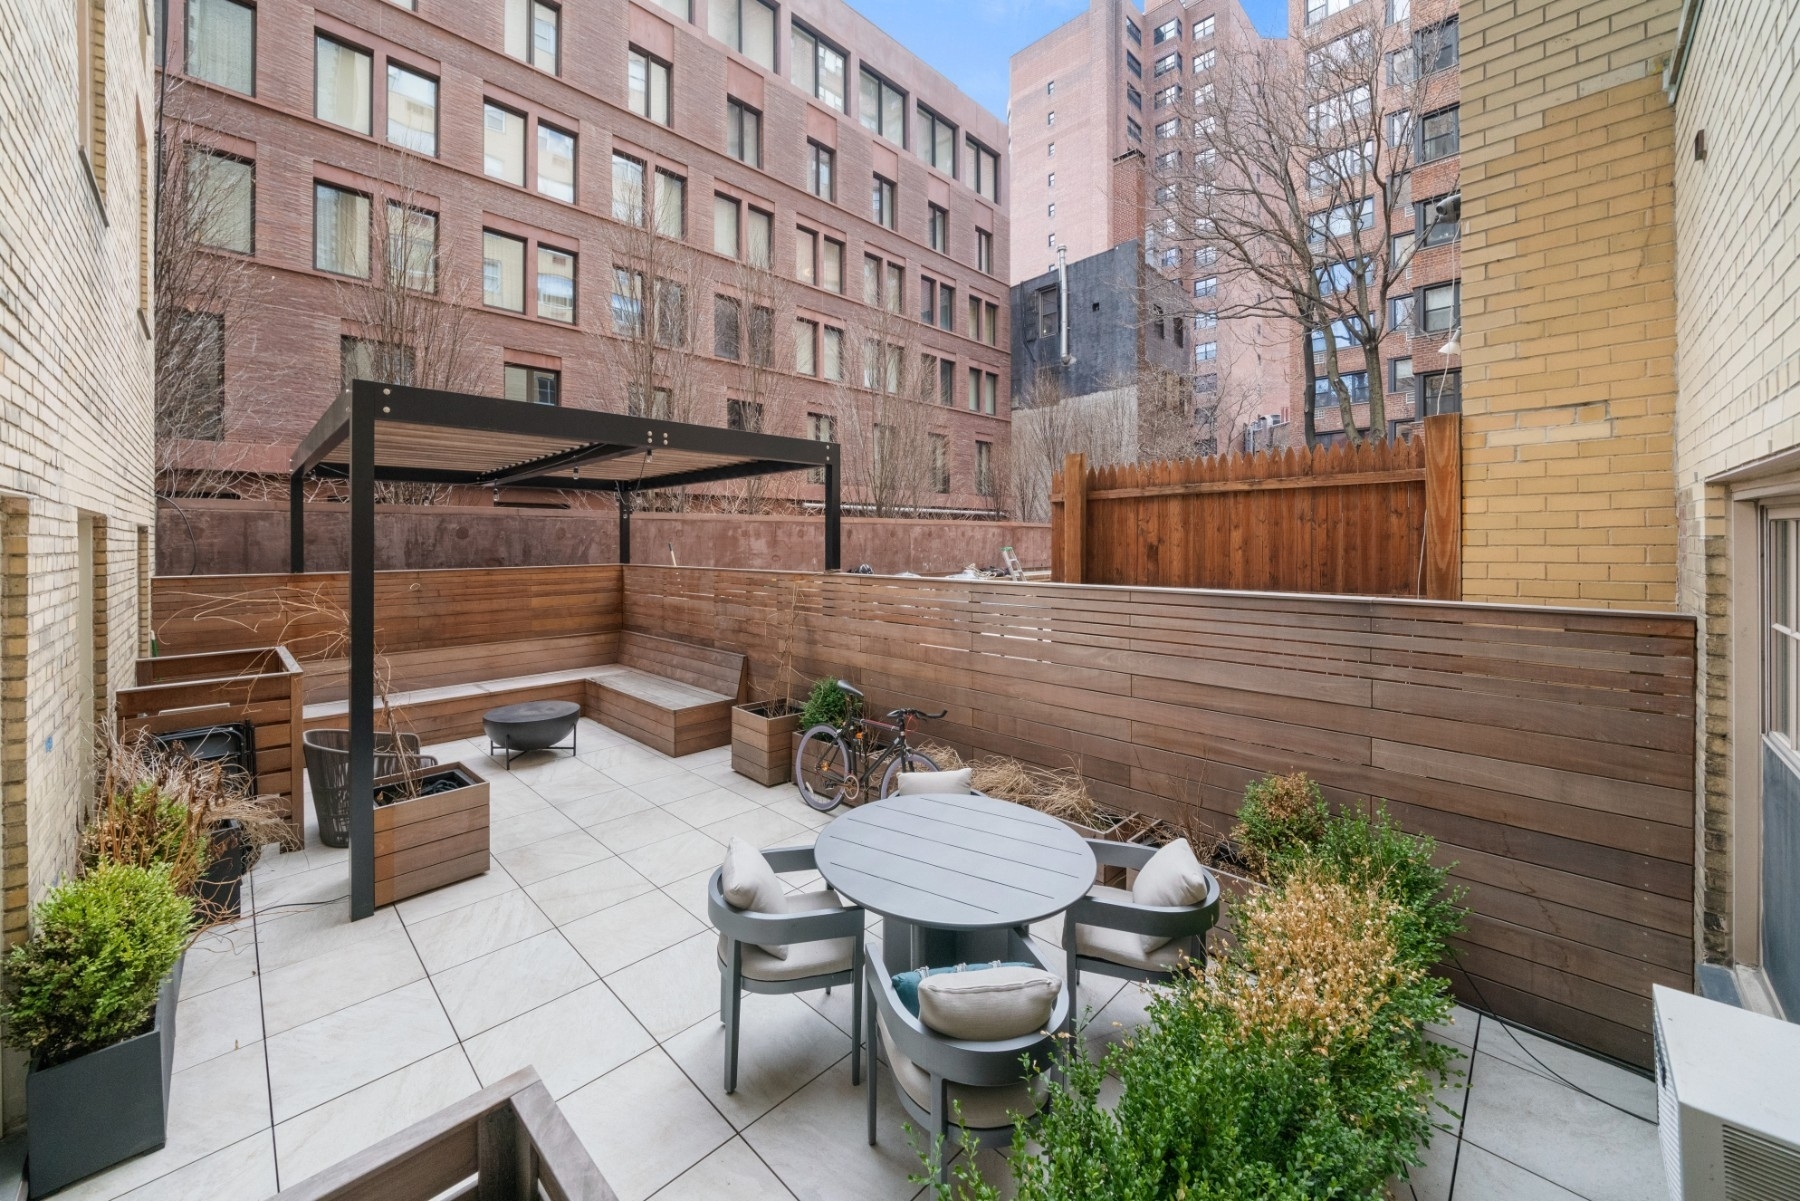 Property at 2 HORATIO ST, 1L West Village, New York, New York 10014